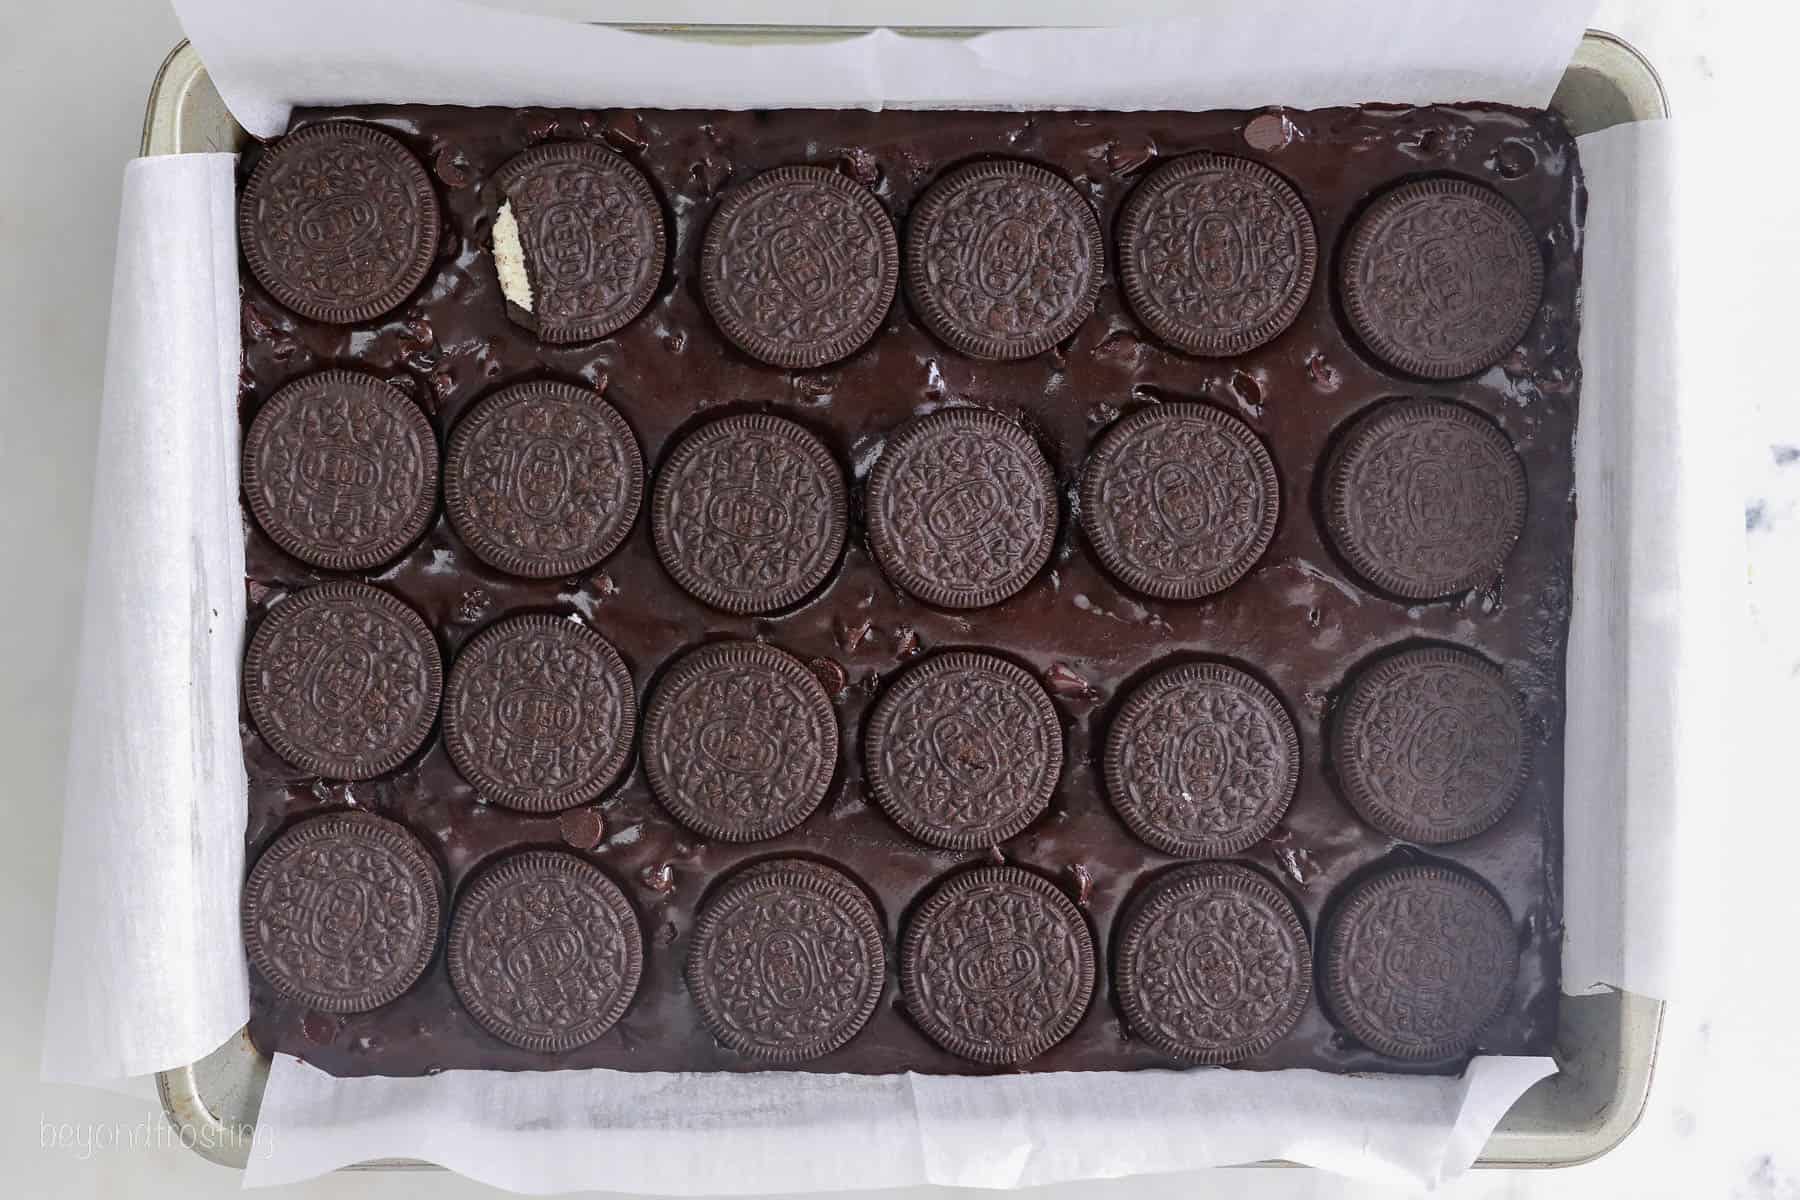 Oreos layered overtop of the brownie batter in a large baking pan.